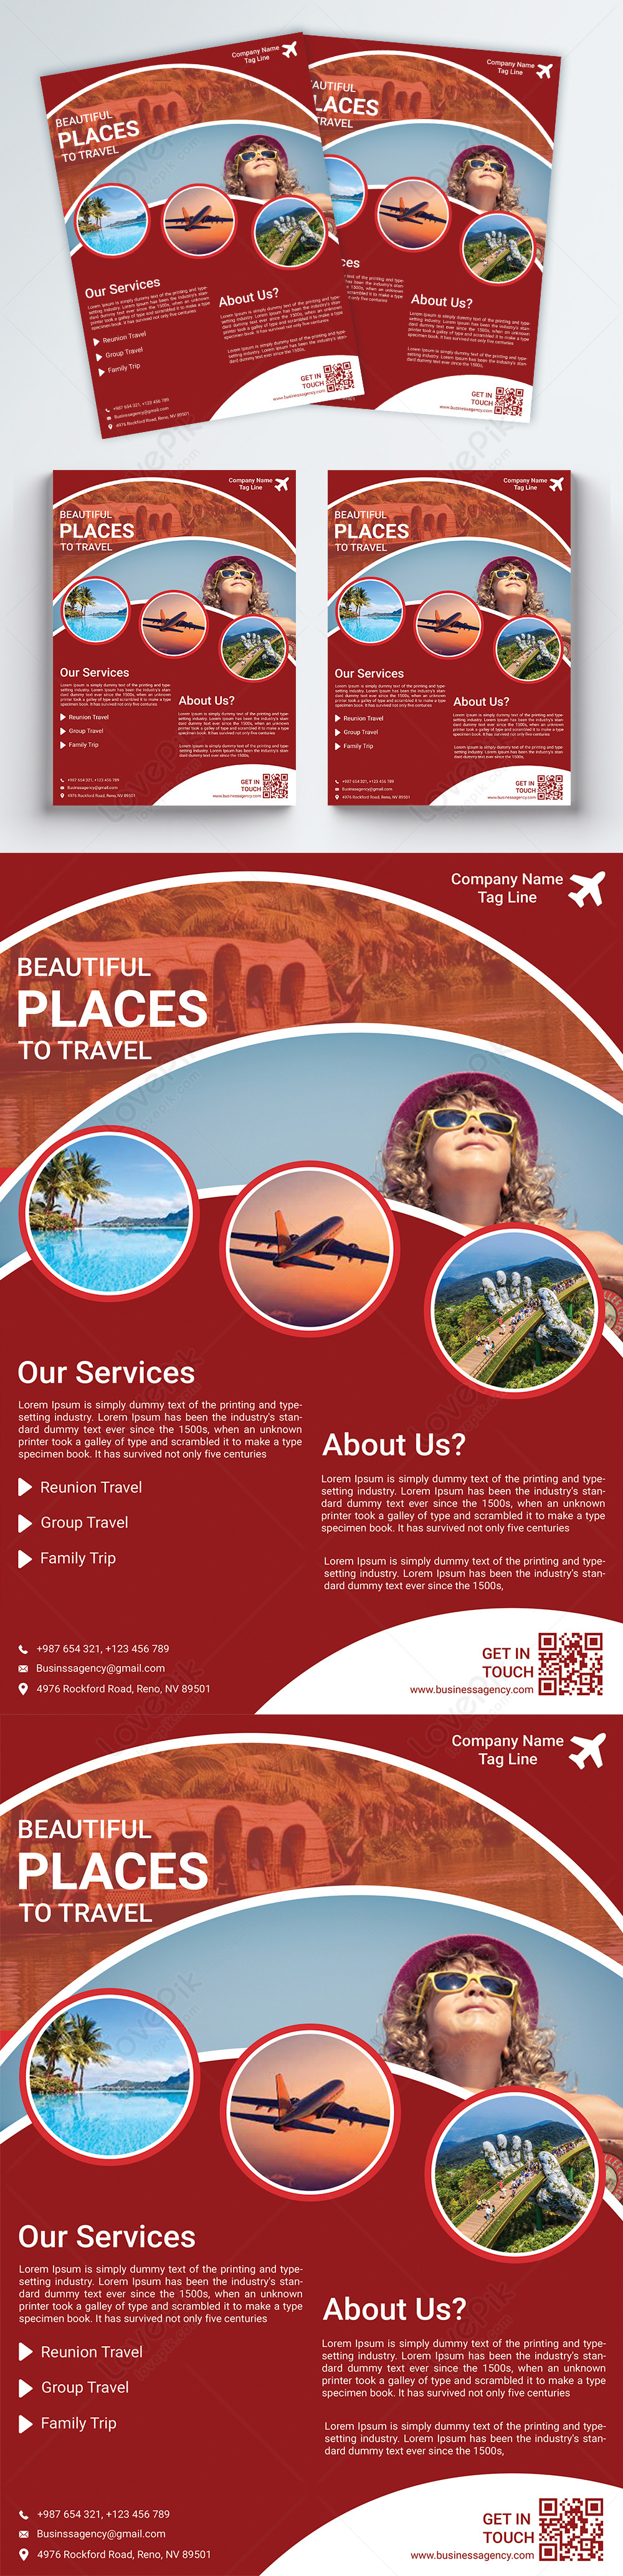 travel-flyer-template-image-picture-free-download-450116078-lovepik